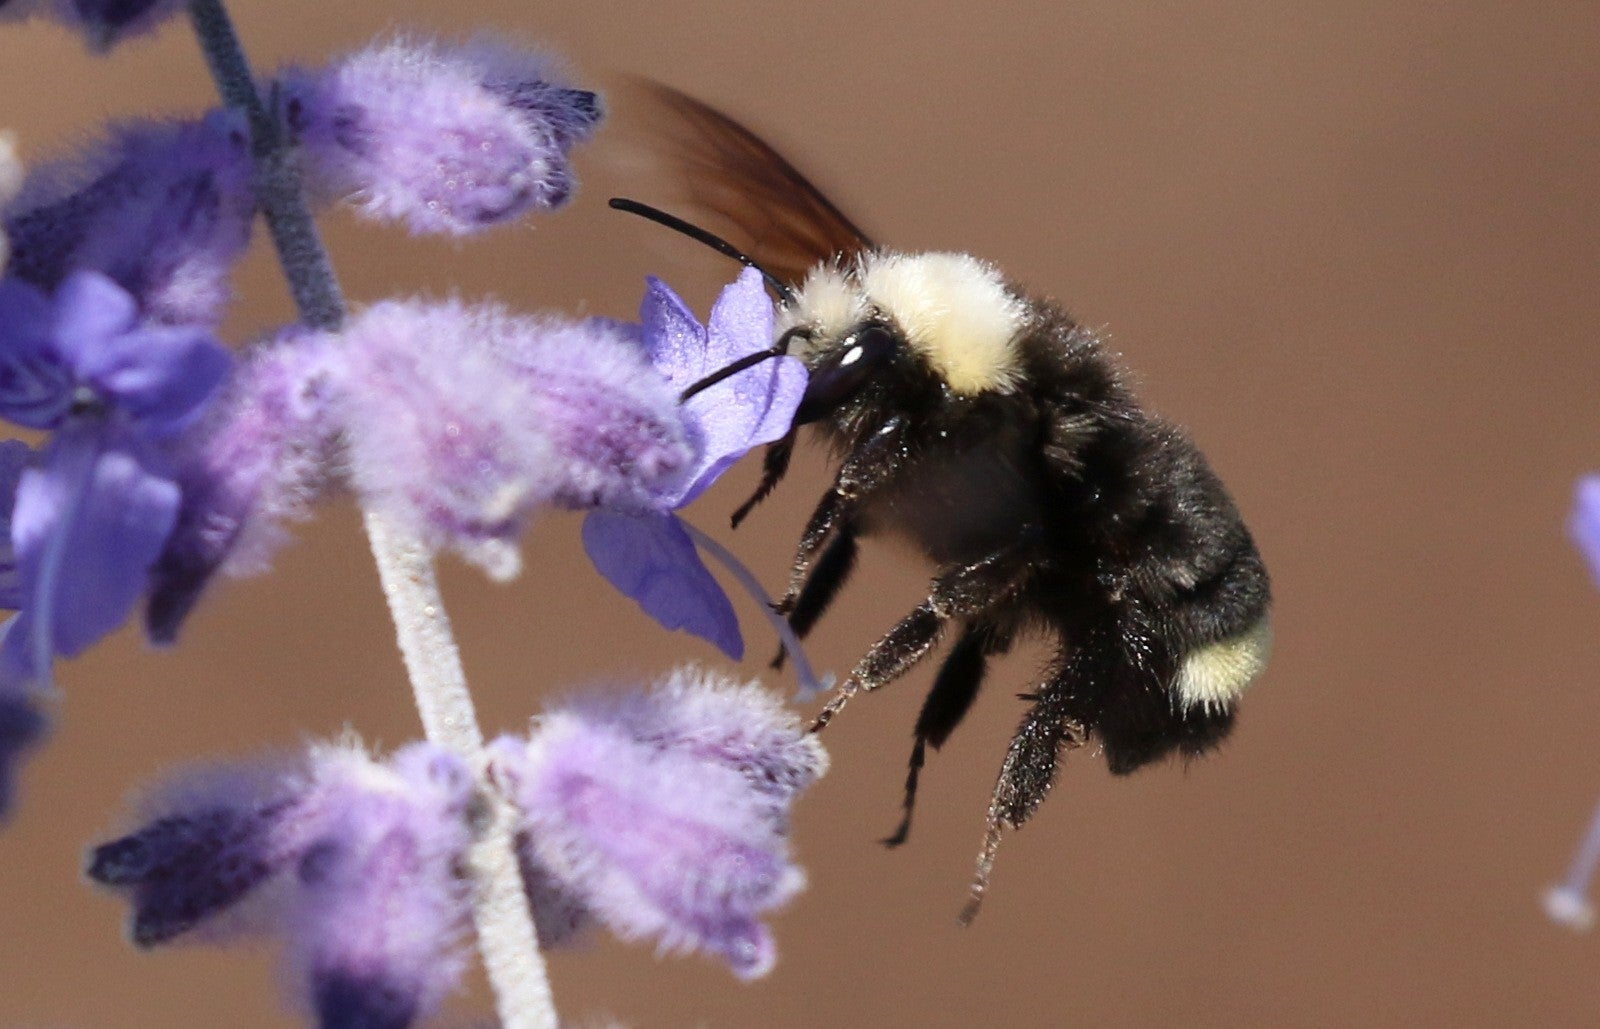 Scientists fail to locate once-common CA bumble bees